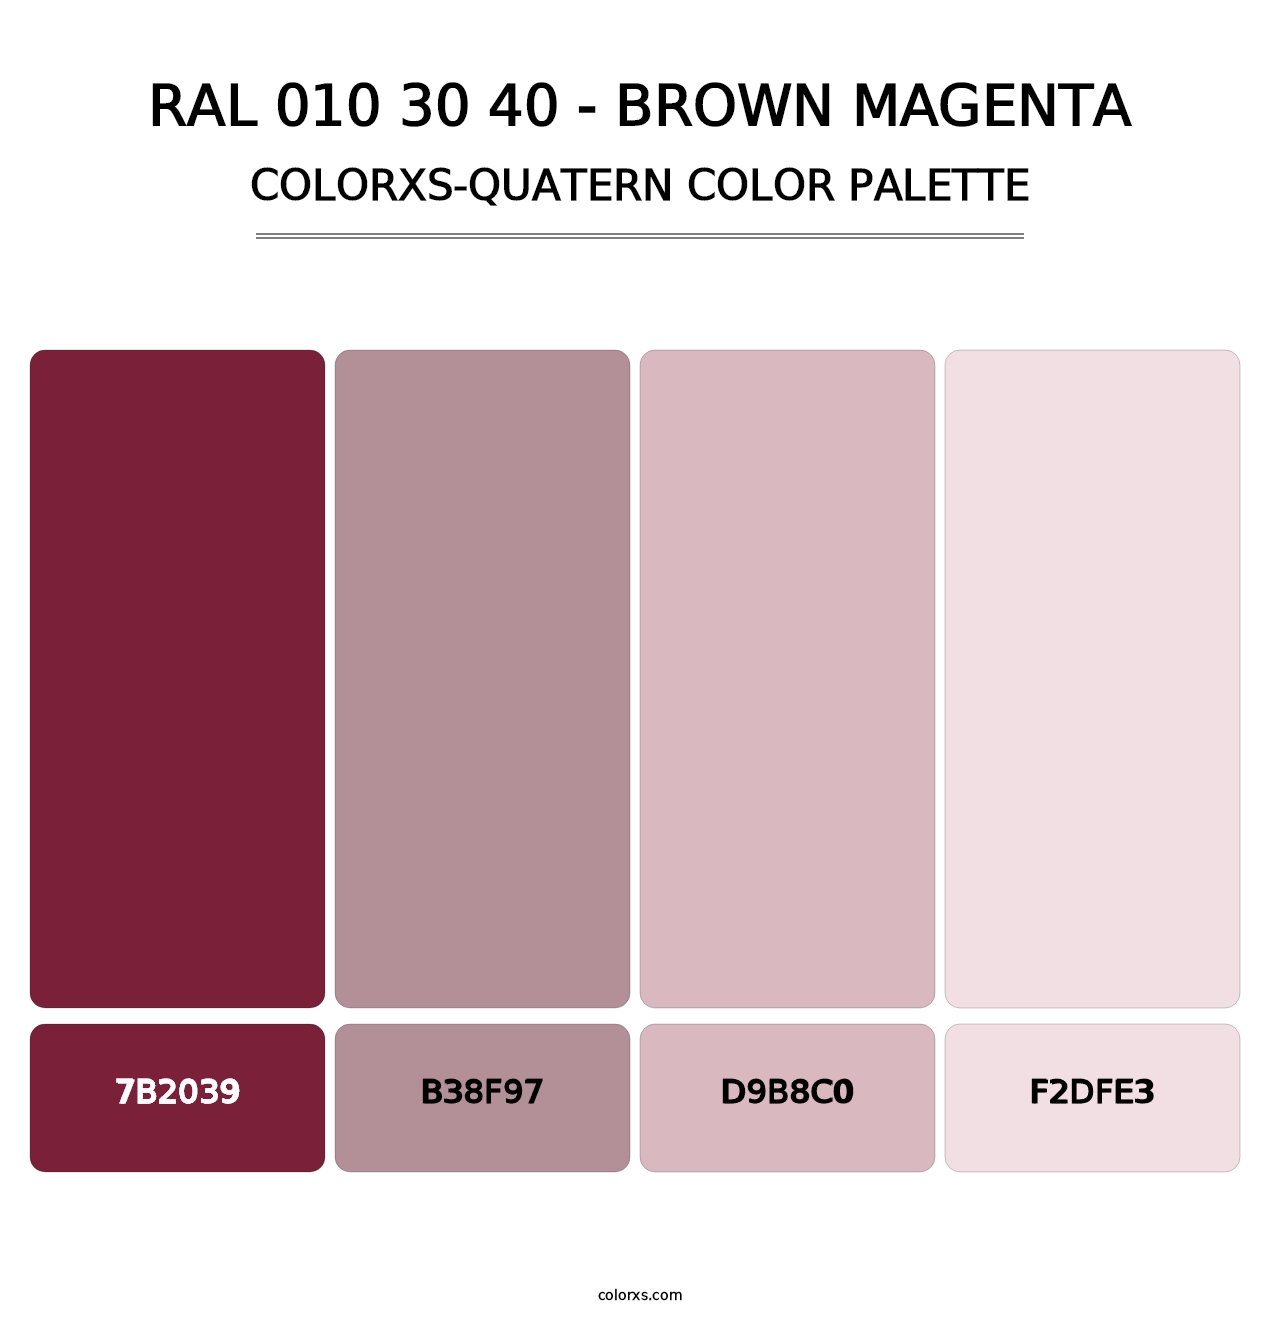 RAL 010 30 40 - Brown Magenta - Colorxs Quatern Palette